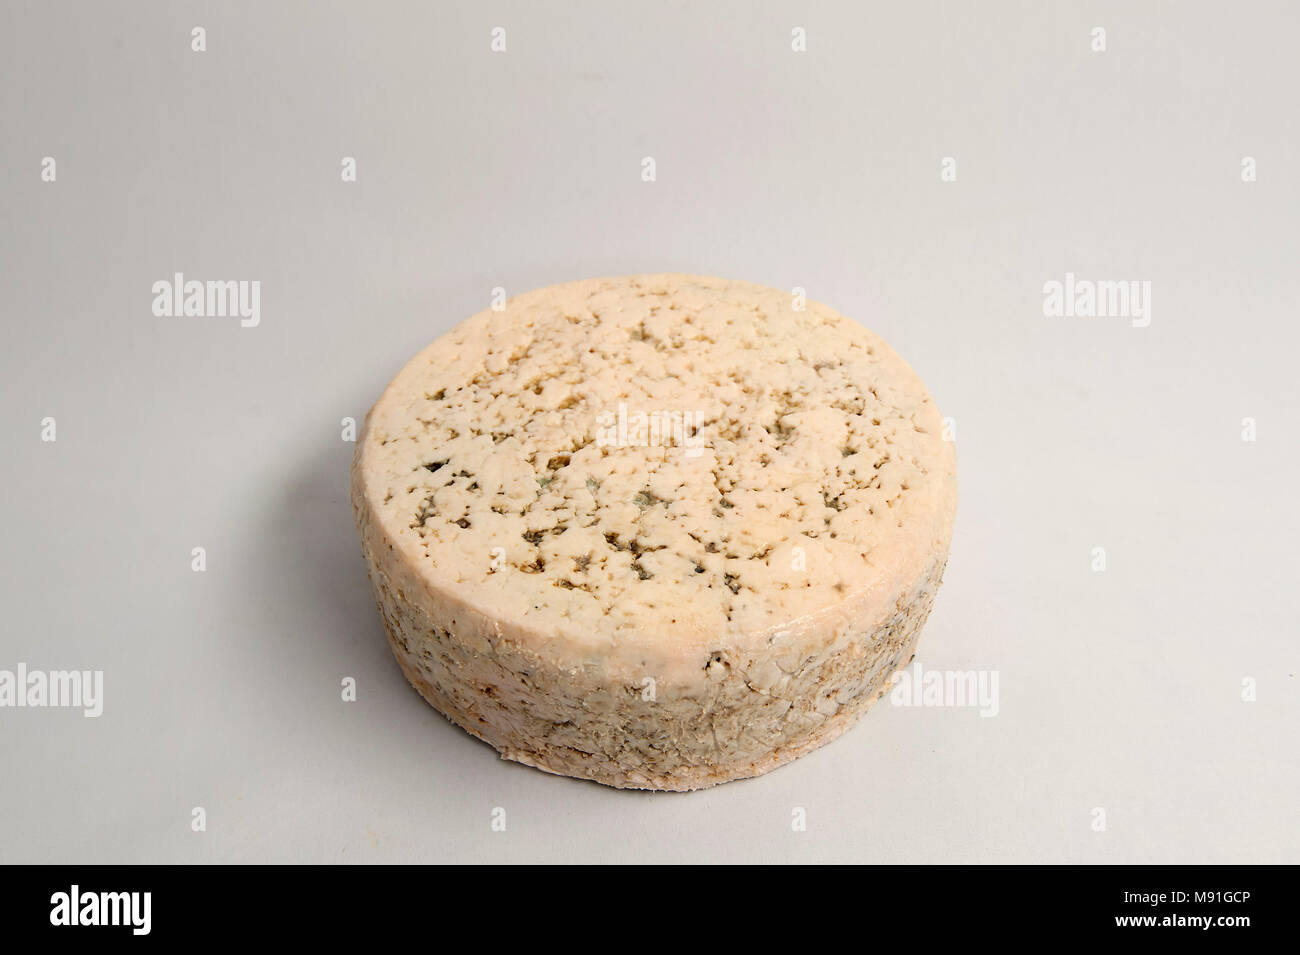 Cabrales is a blue cheese made in the artisan tradition by rural dairy farmers in Asturias, Spain. Stock Photo